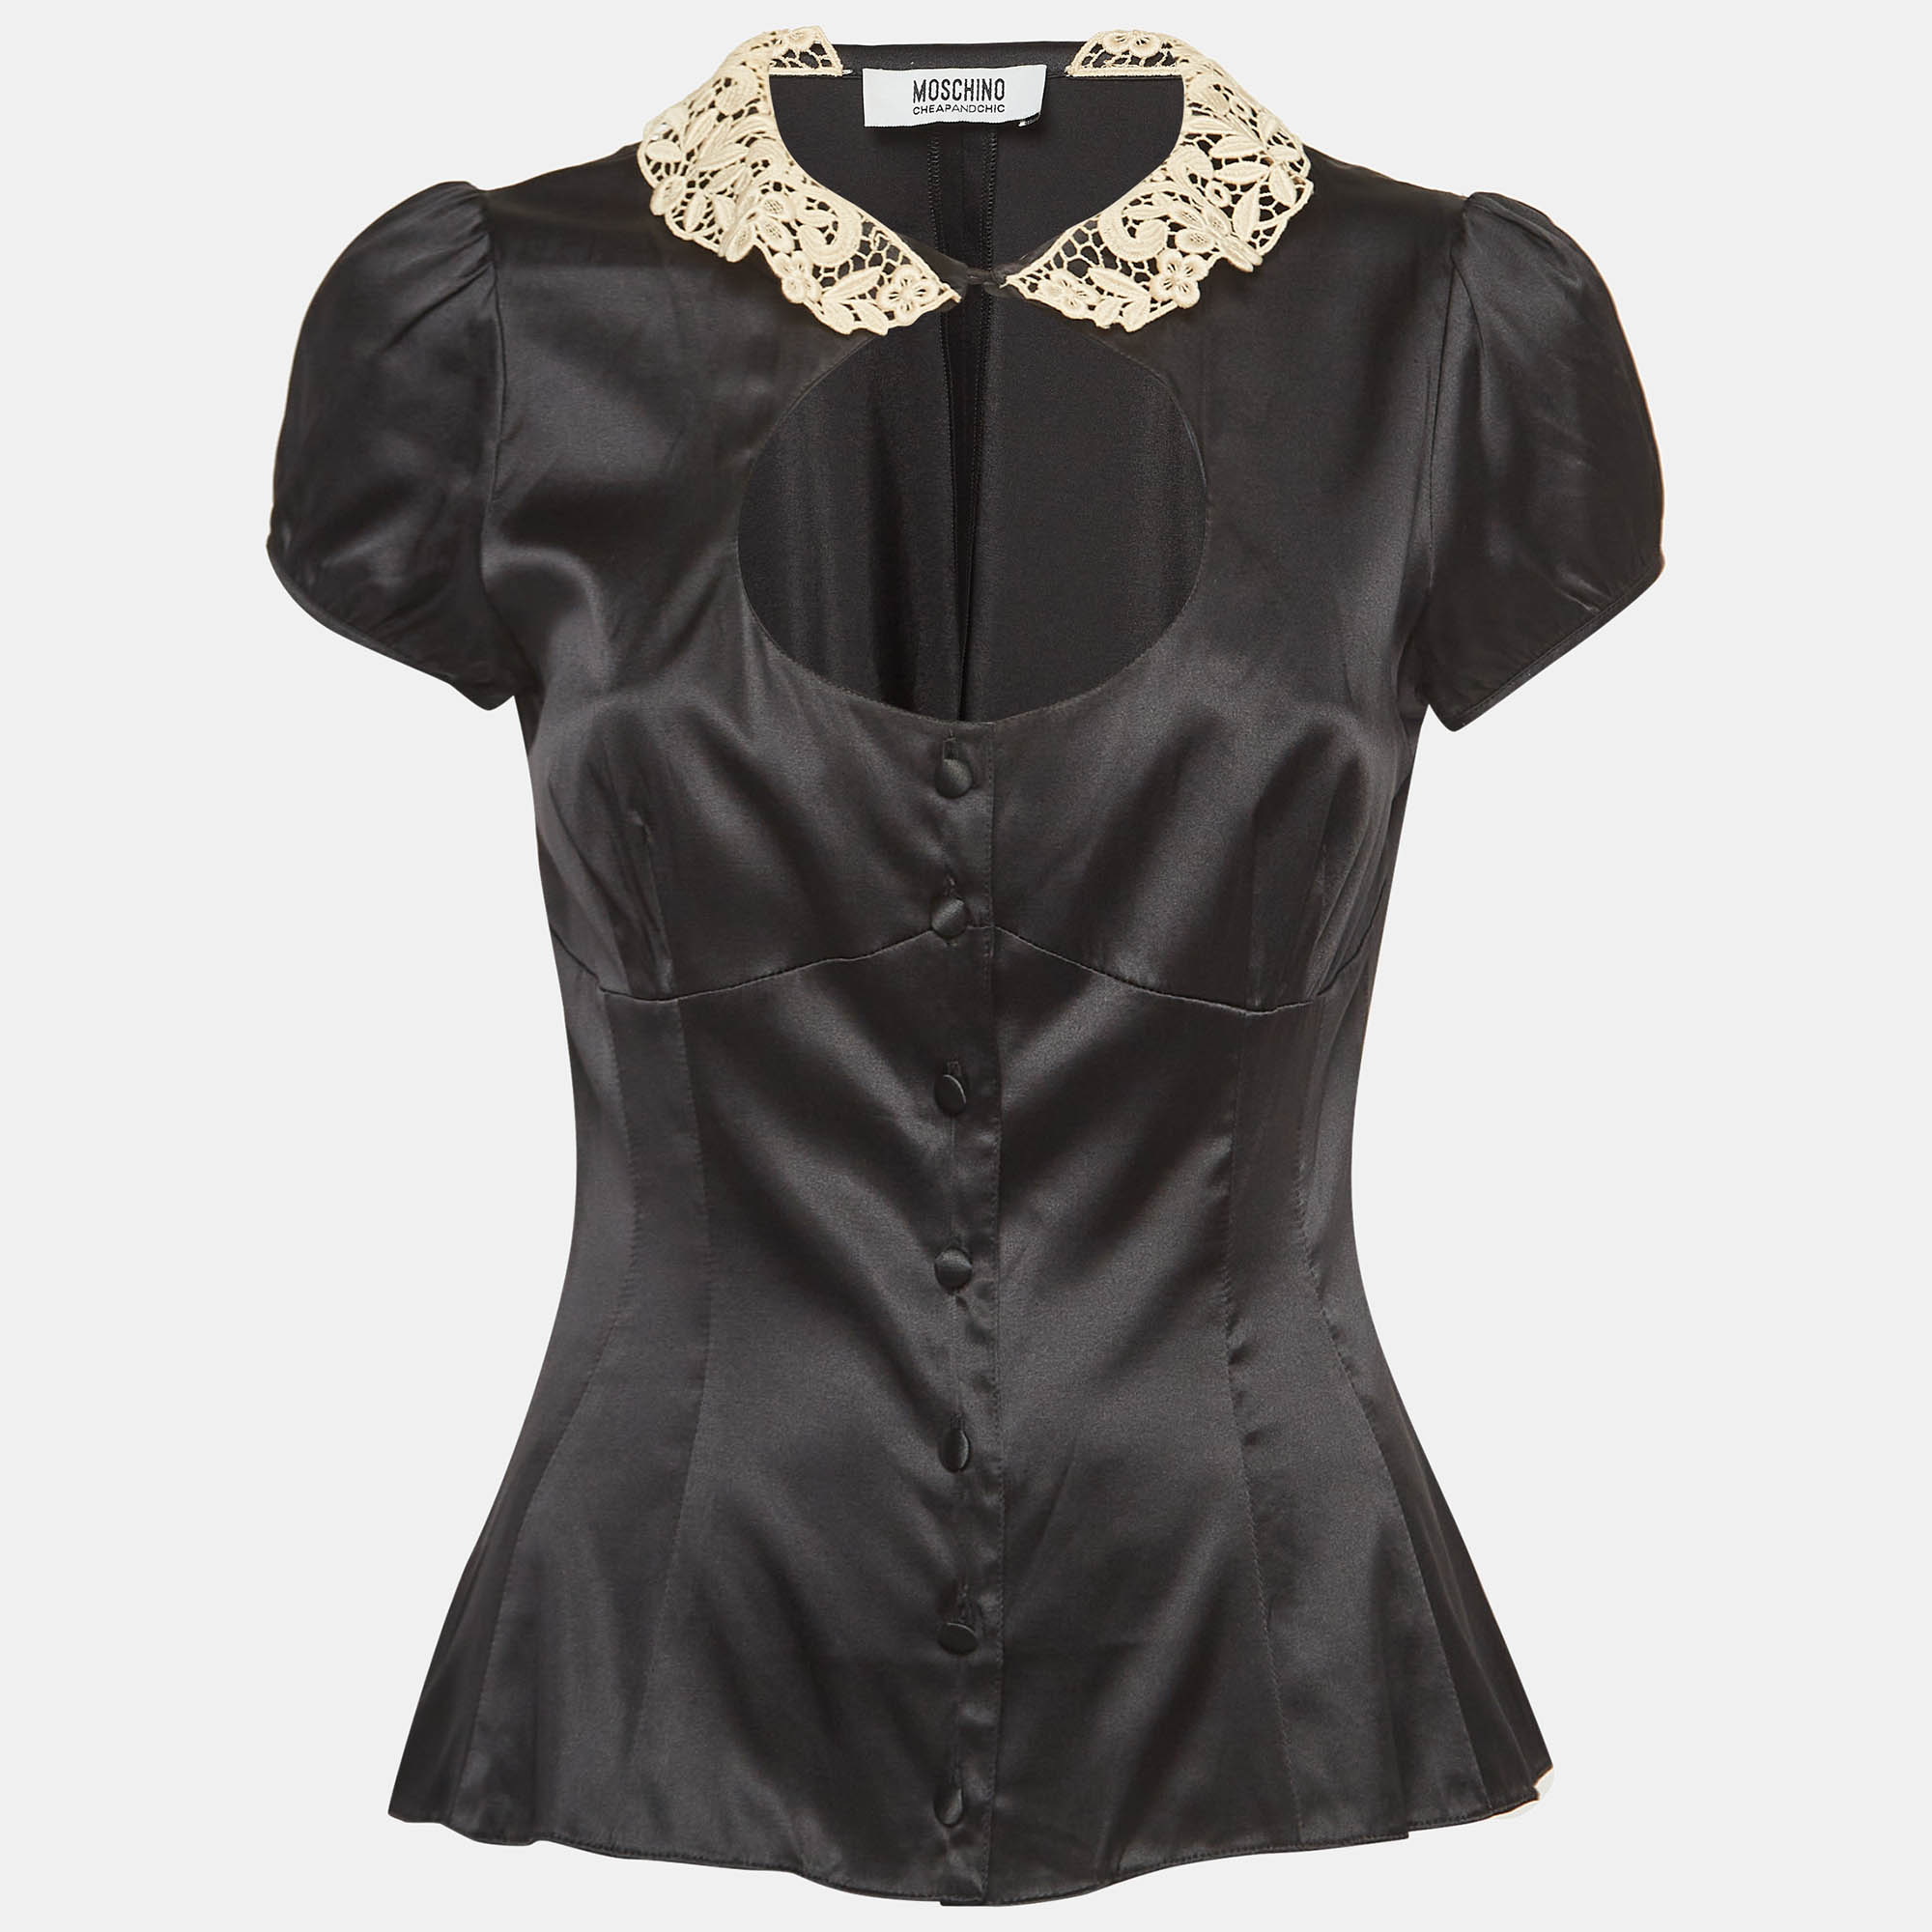 

Moschino Cheap and Chic Black Lace Collar Satin Blouse